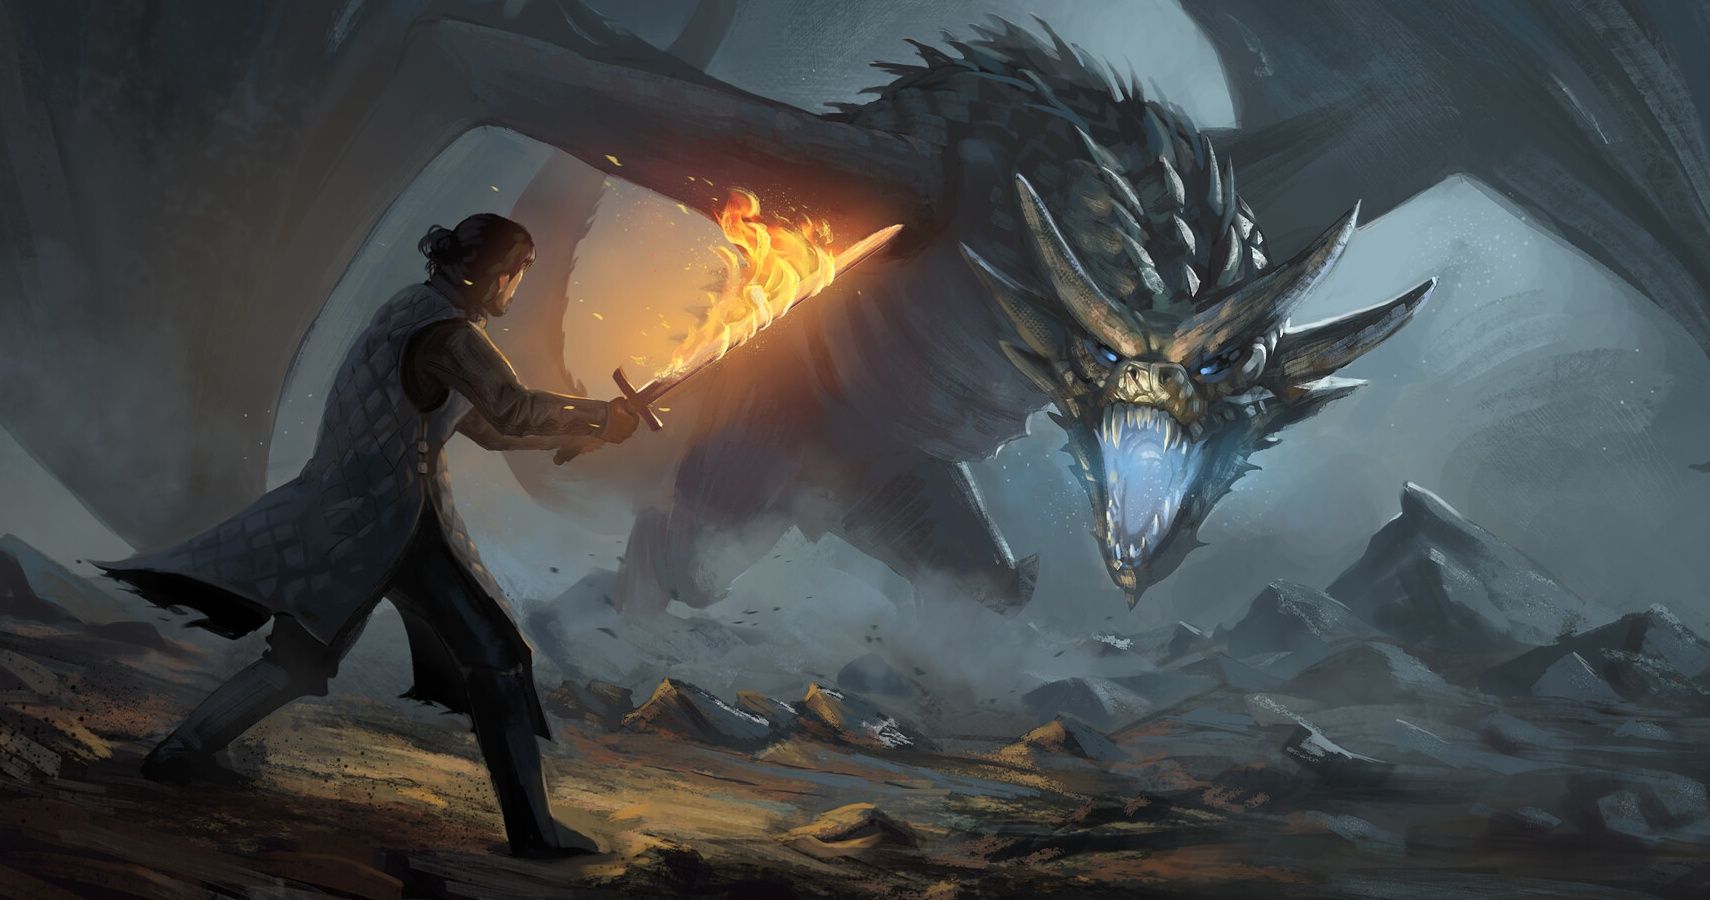 Azor Ahai - A Wiki of Ice and Fire